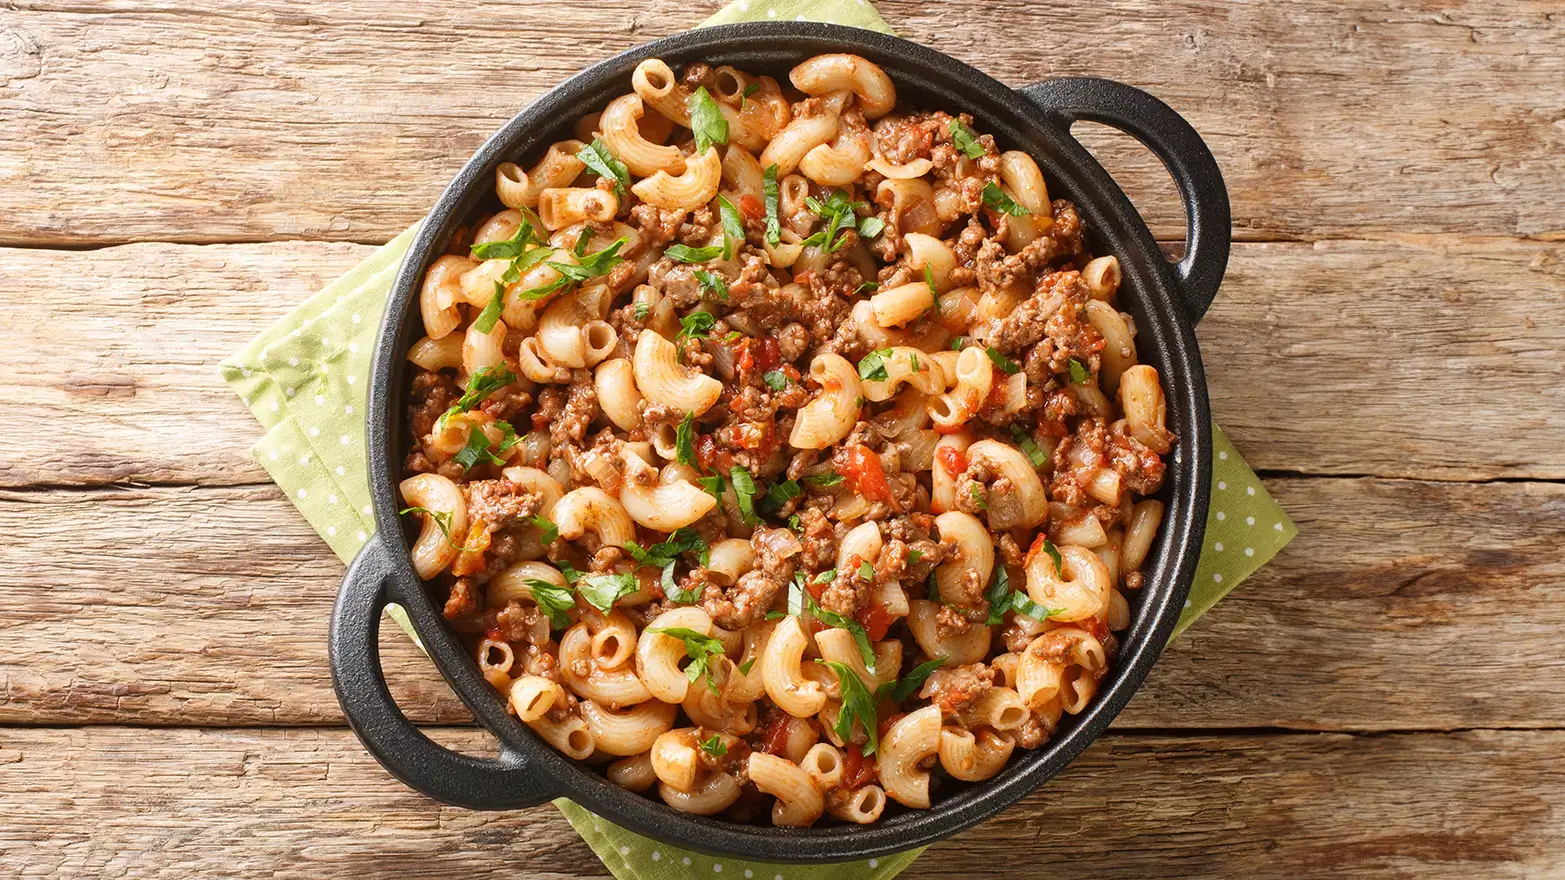 Chickpea pasta with meat sauce